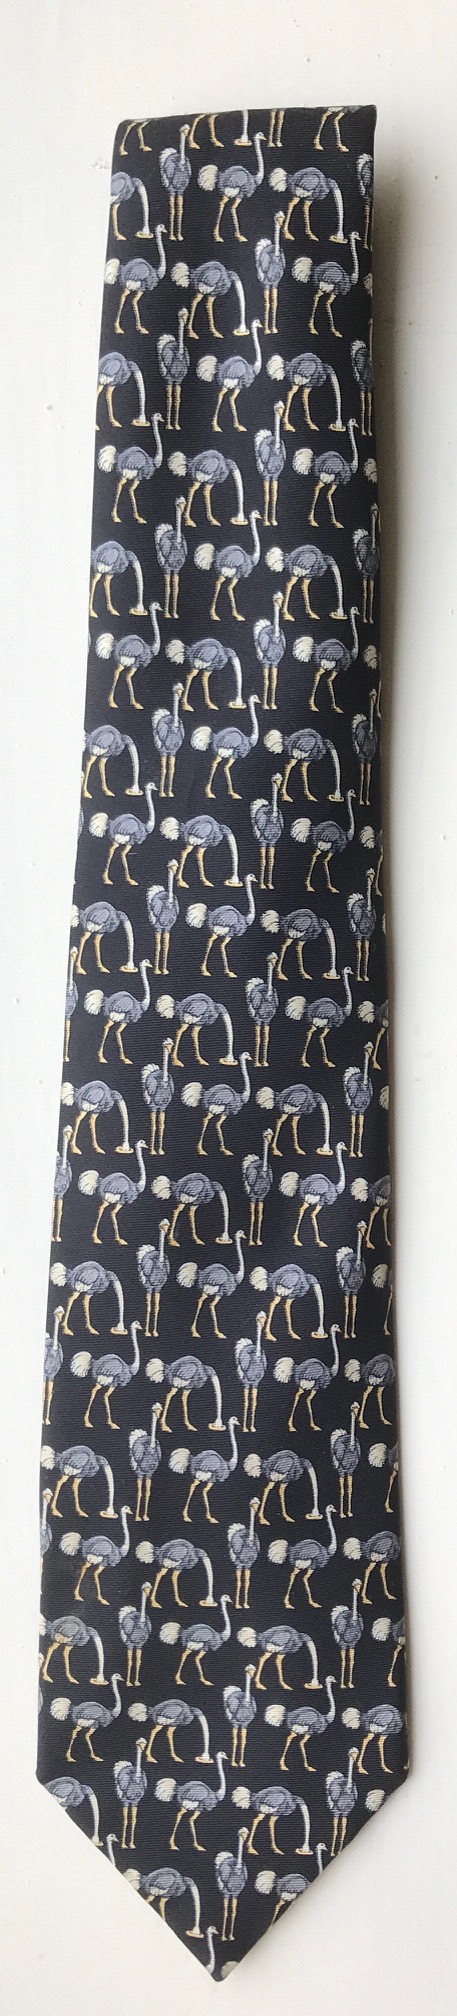 Ties: Ostriches.